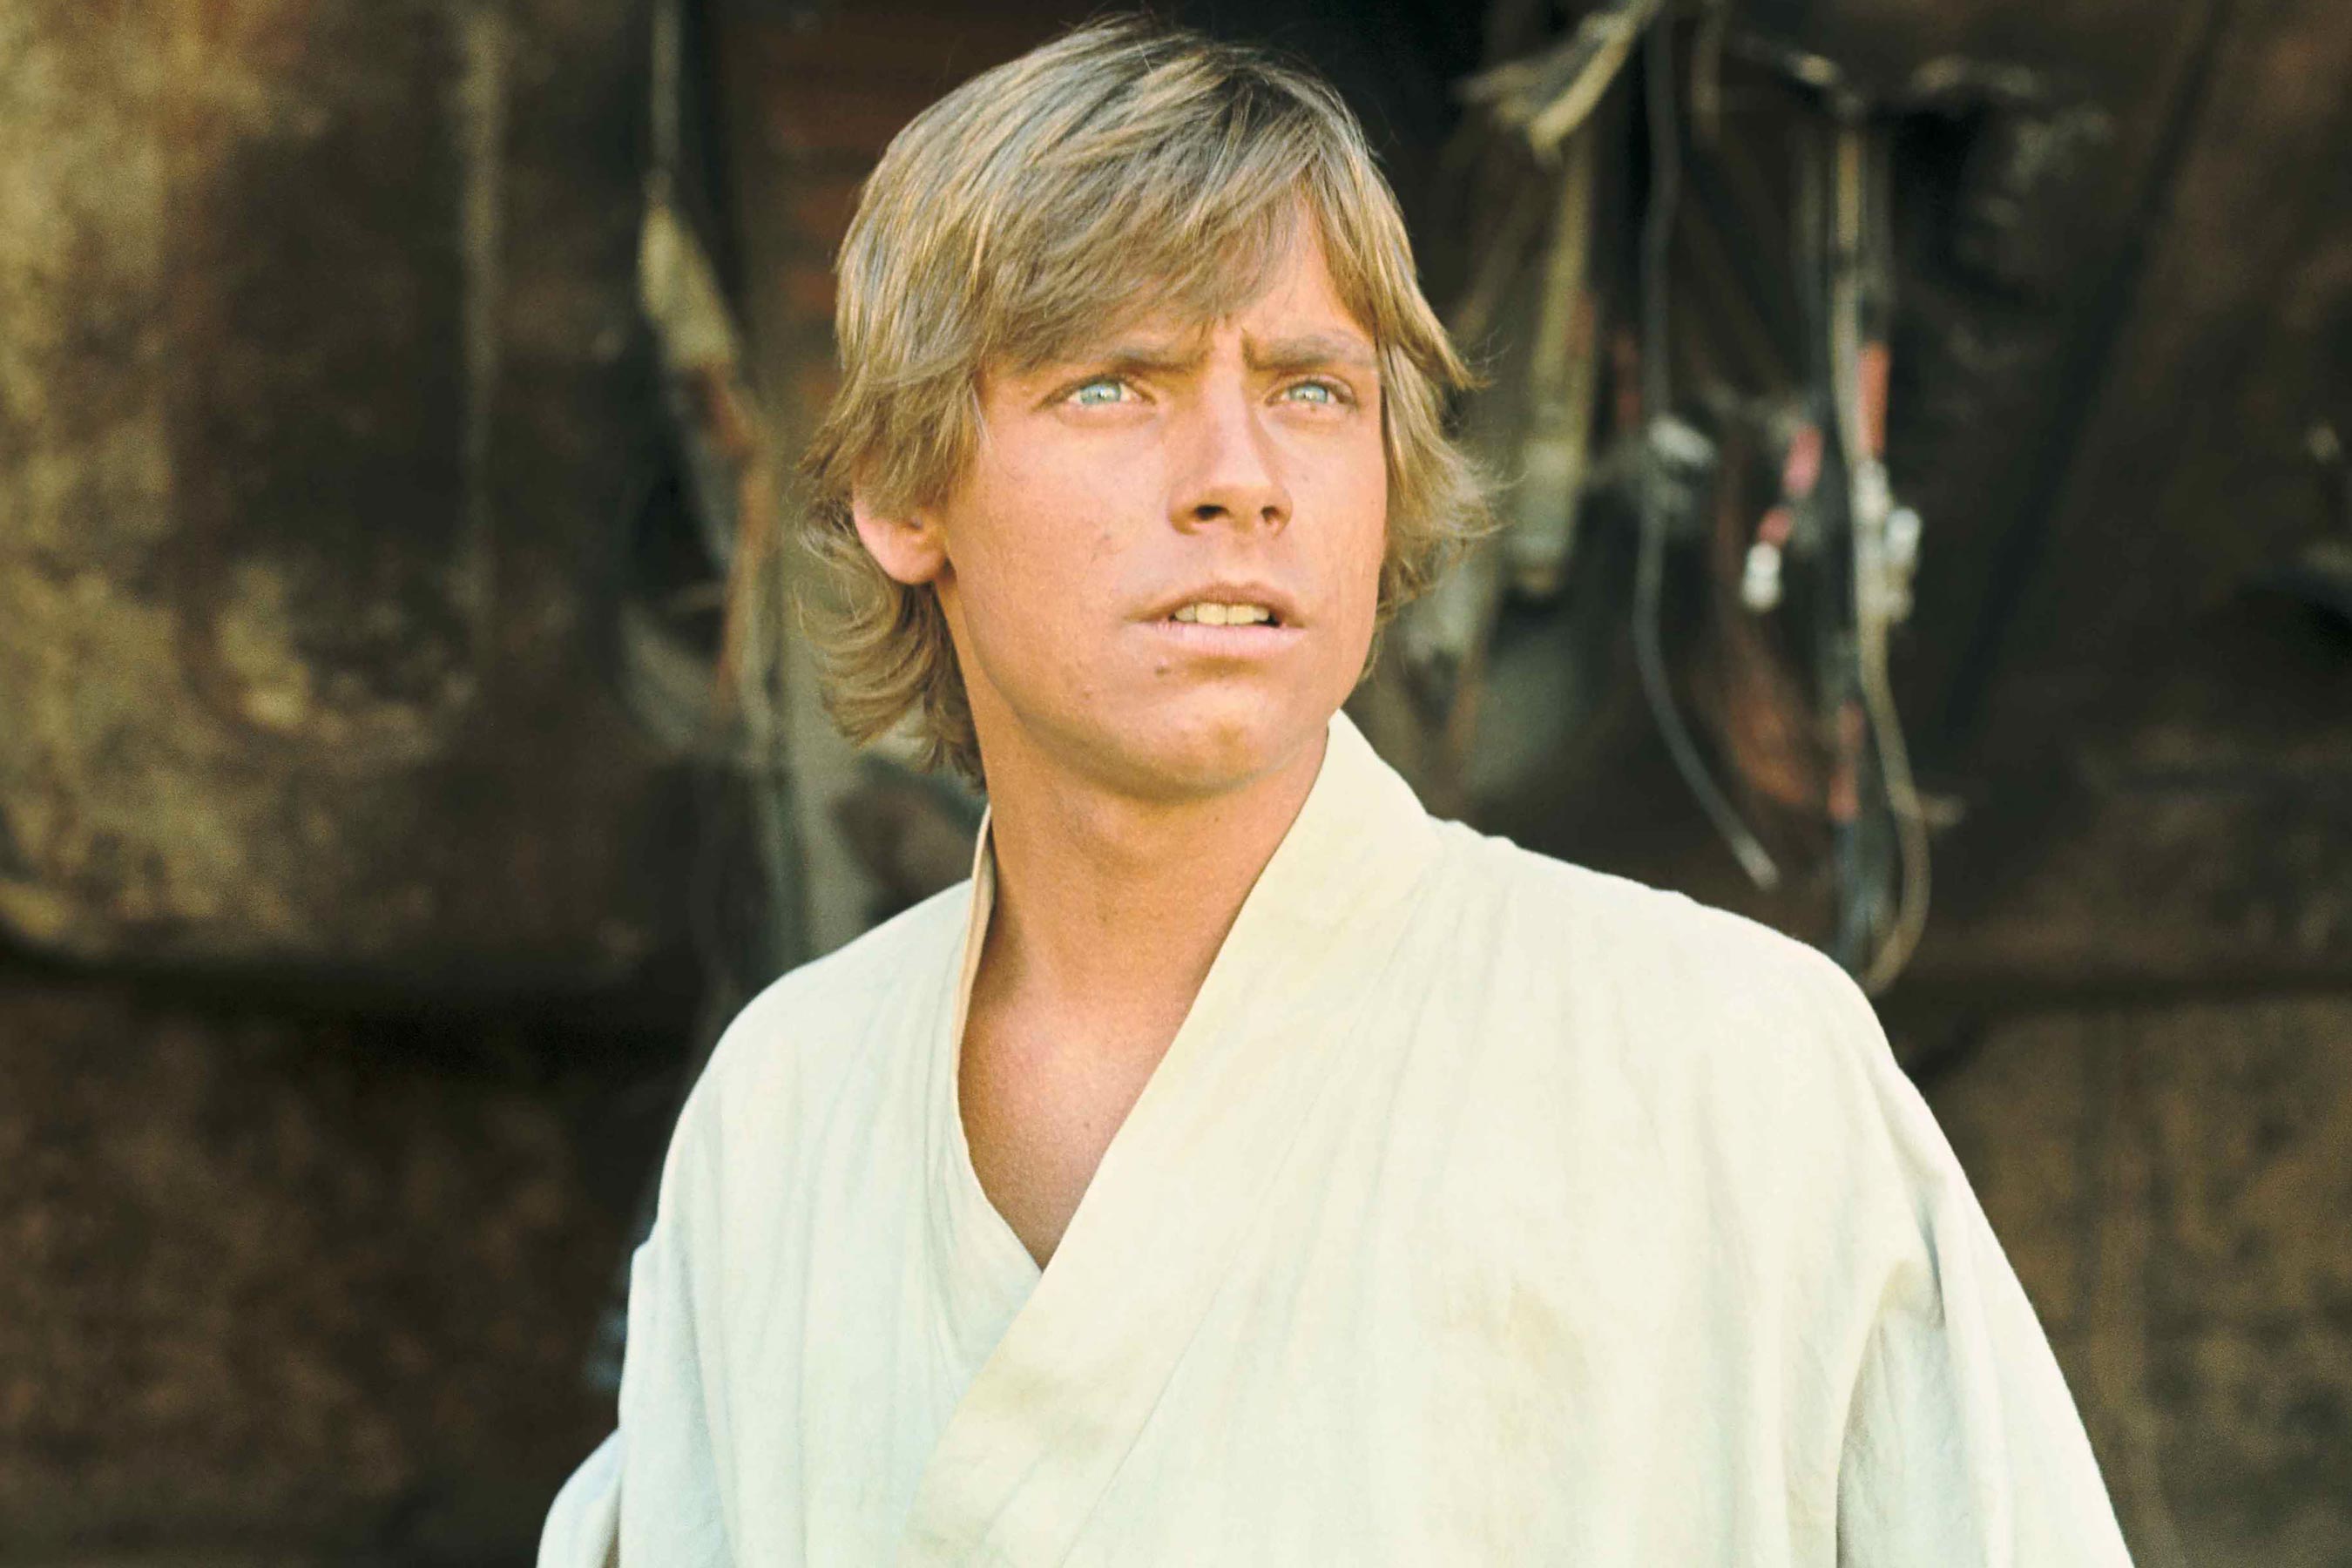 Star Wars: Episode IV - A New Hope (1977) Mark Hamill CR: Lucasfilm